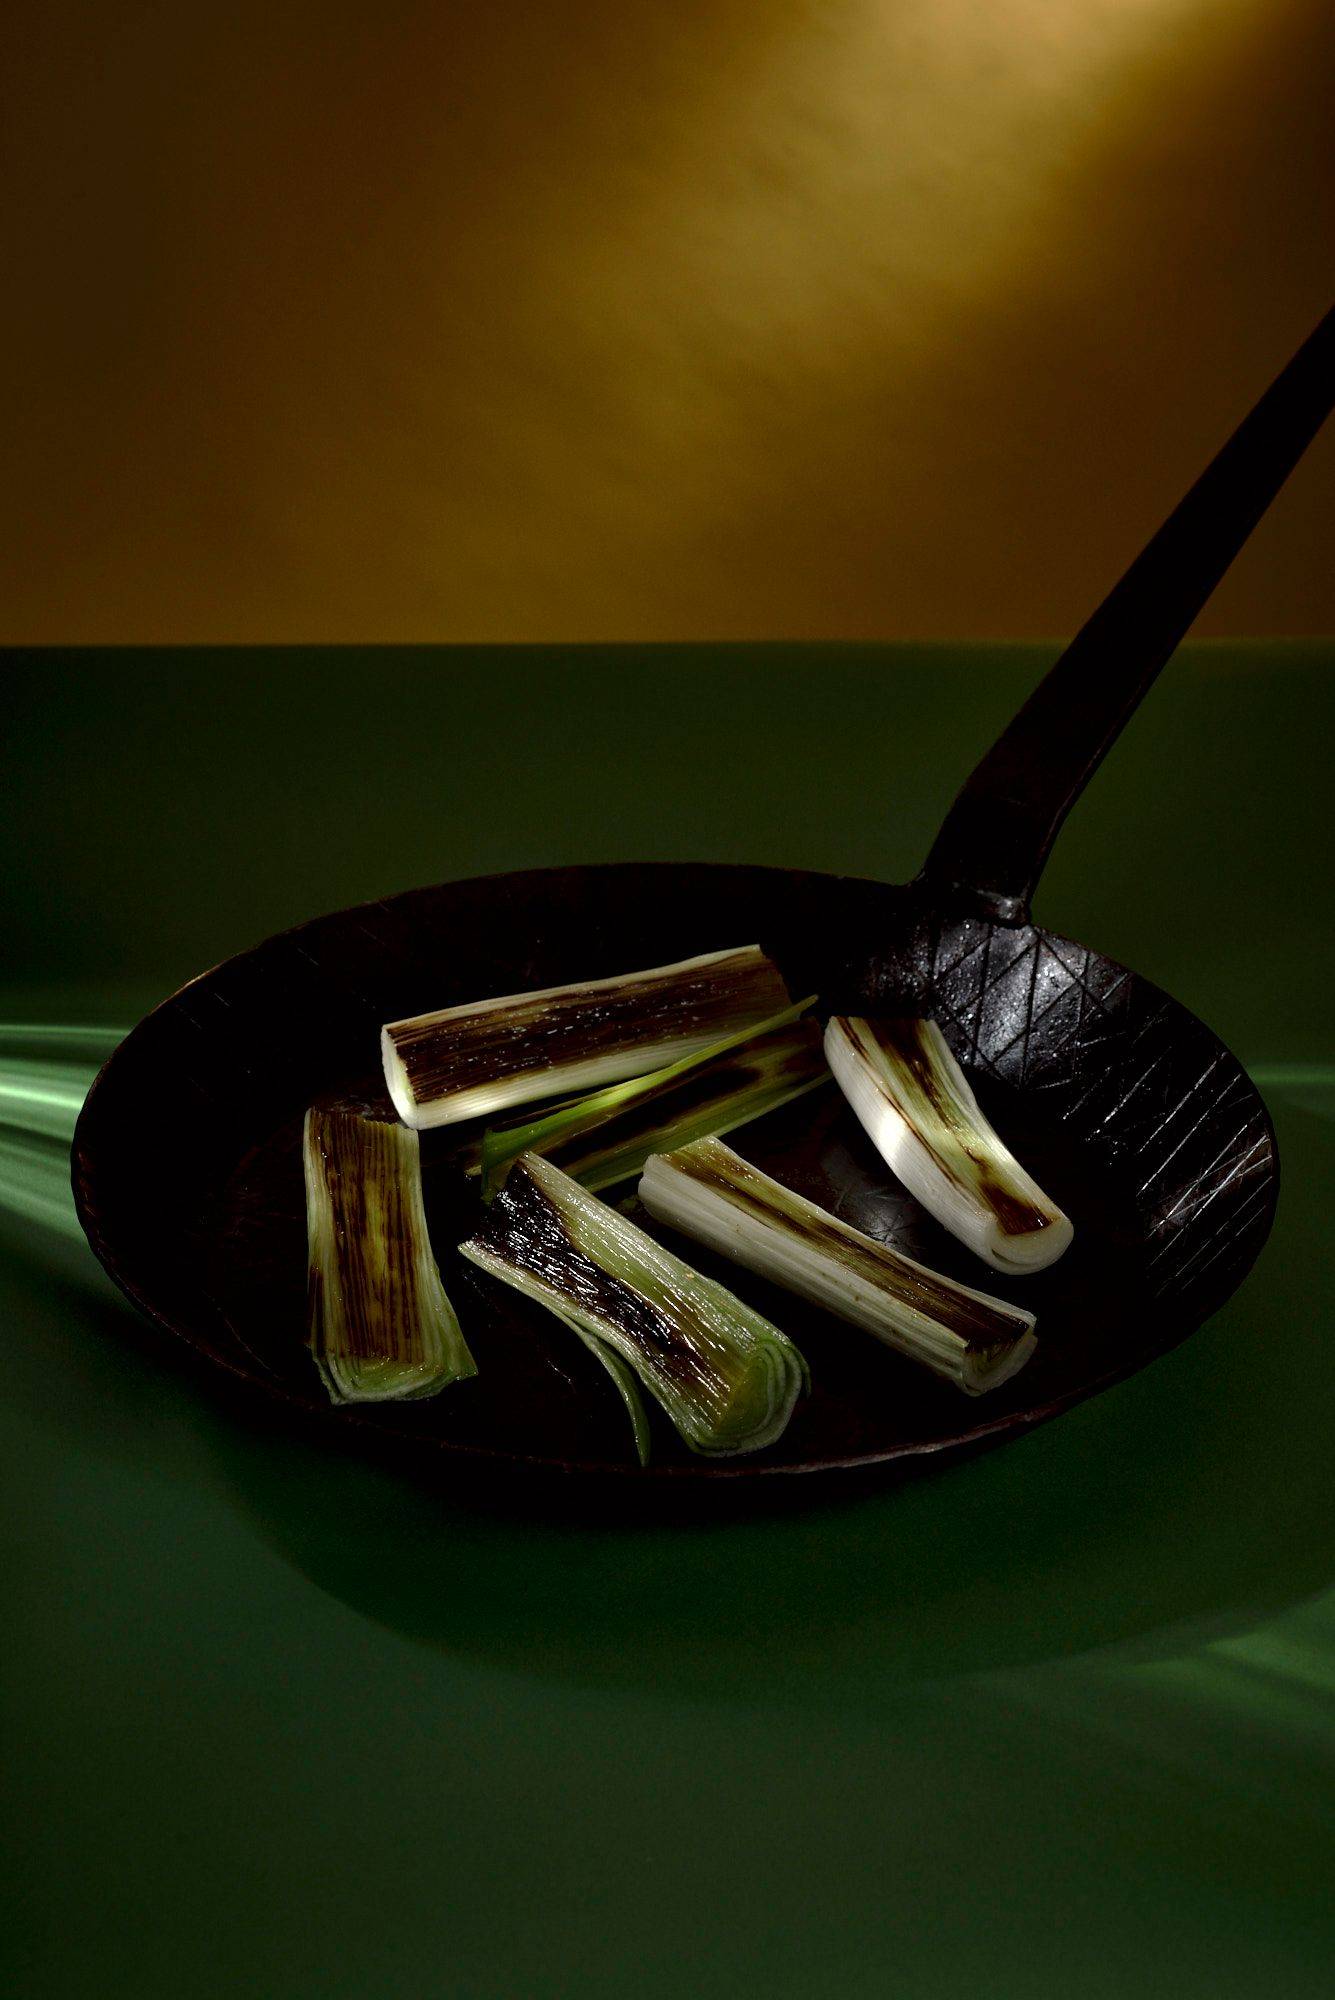 roasted leek in a pan with green yellow background